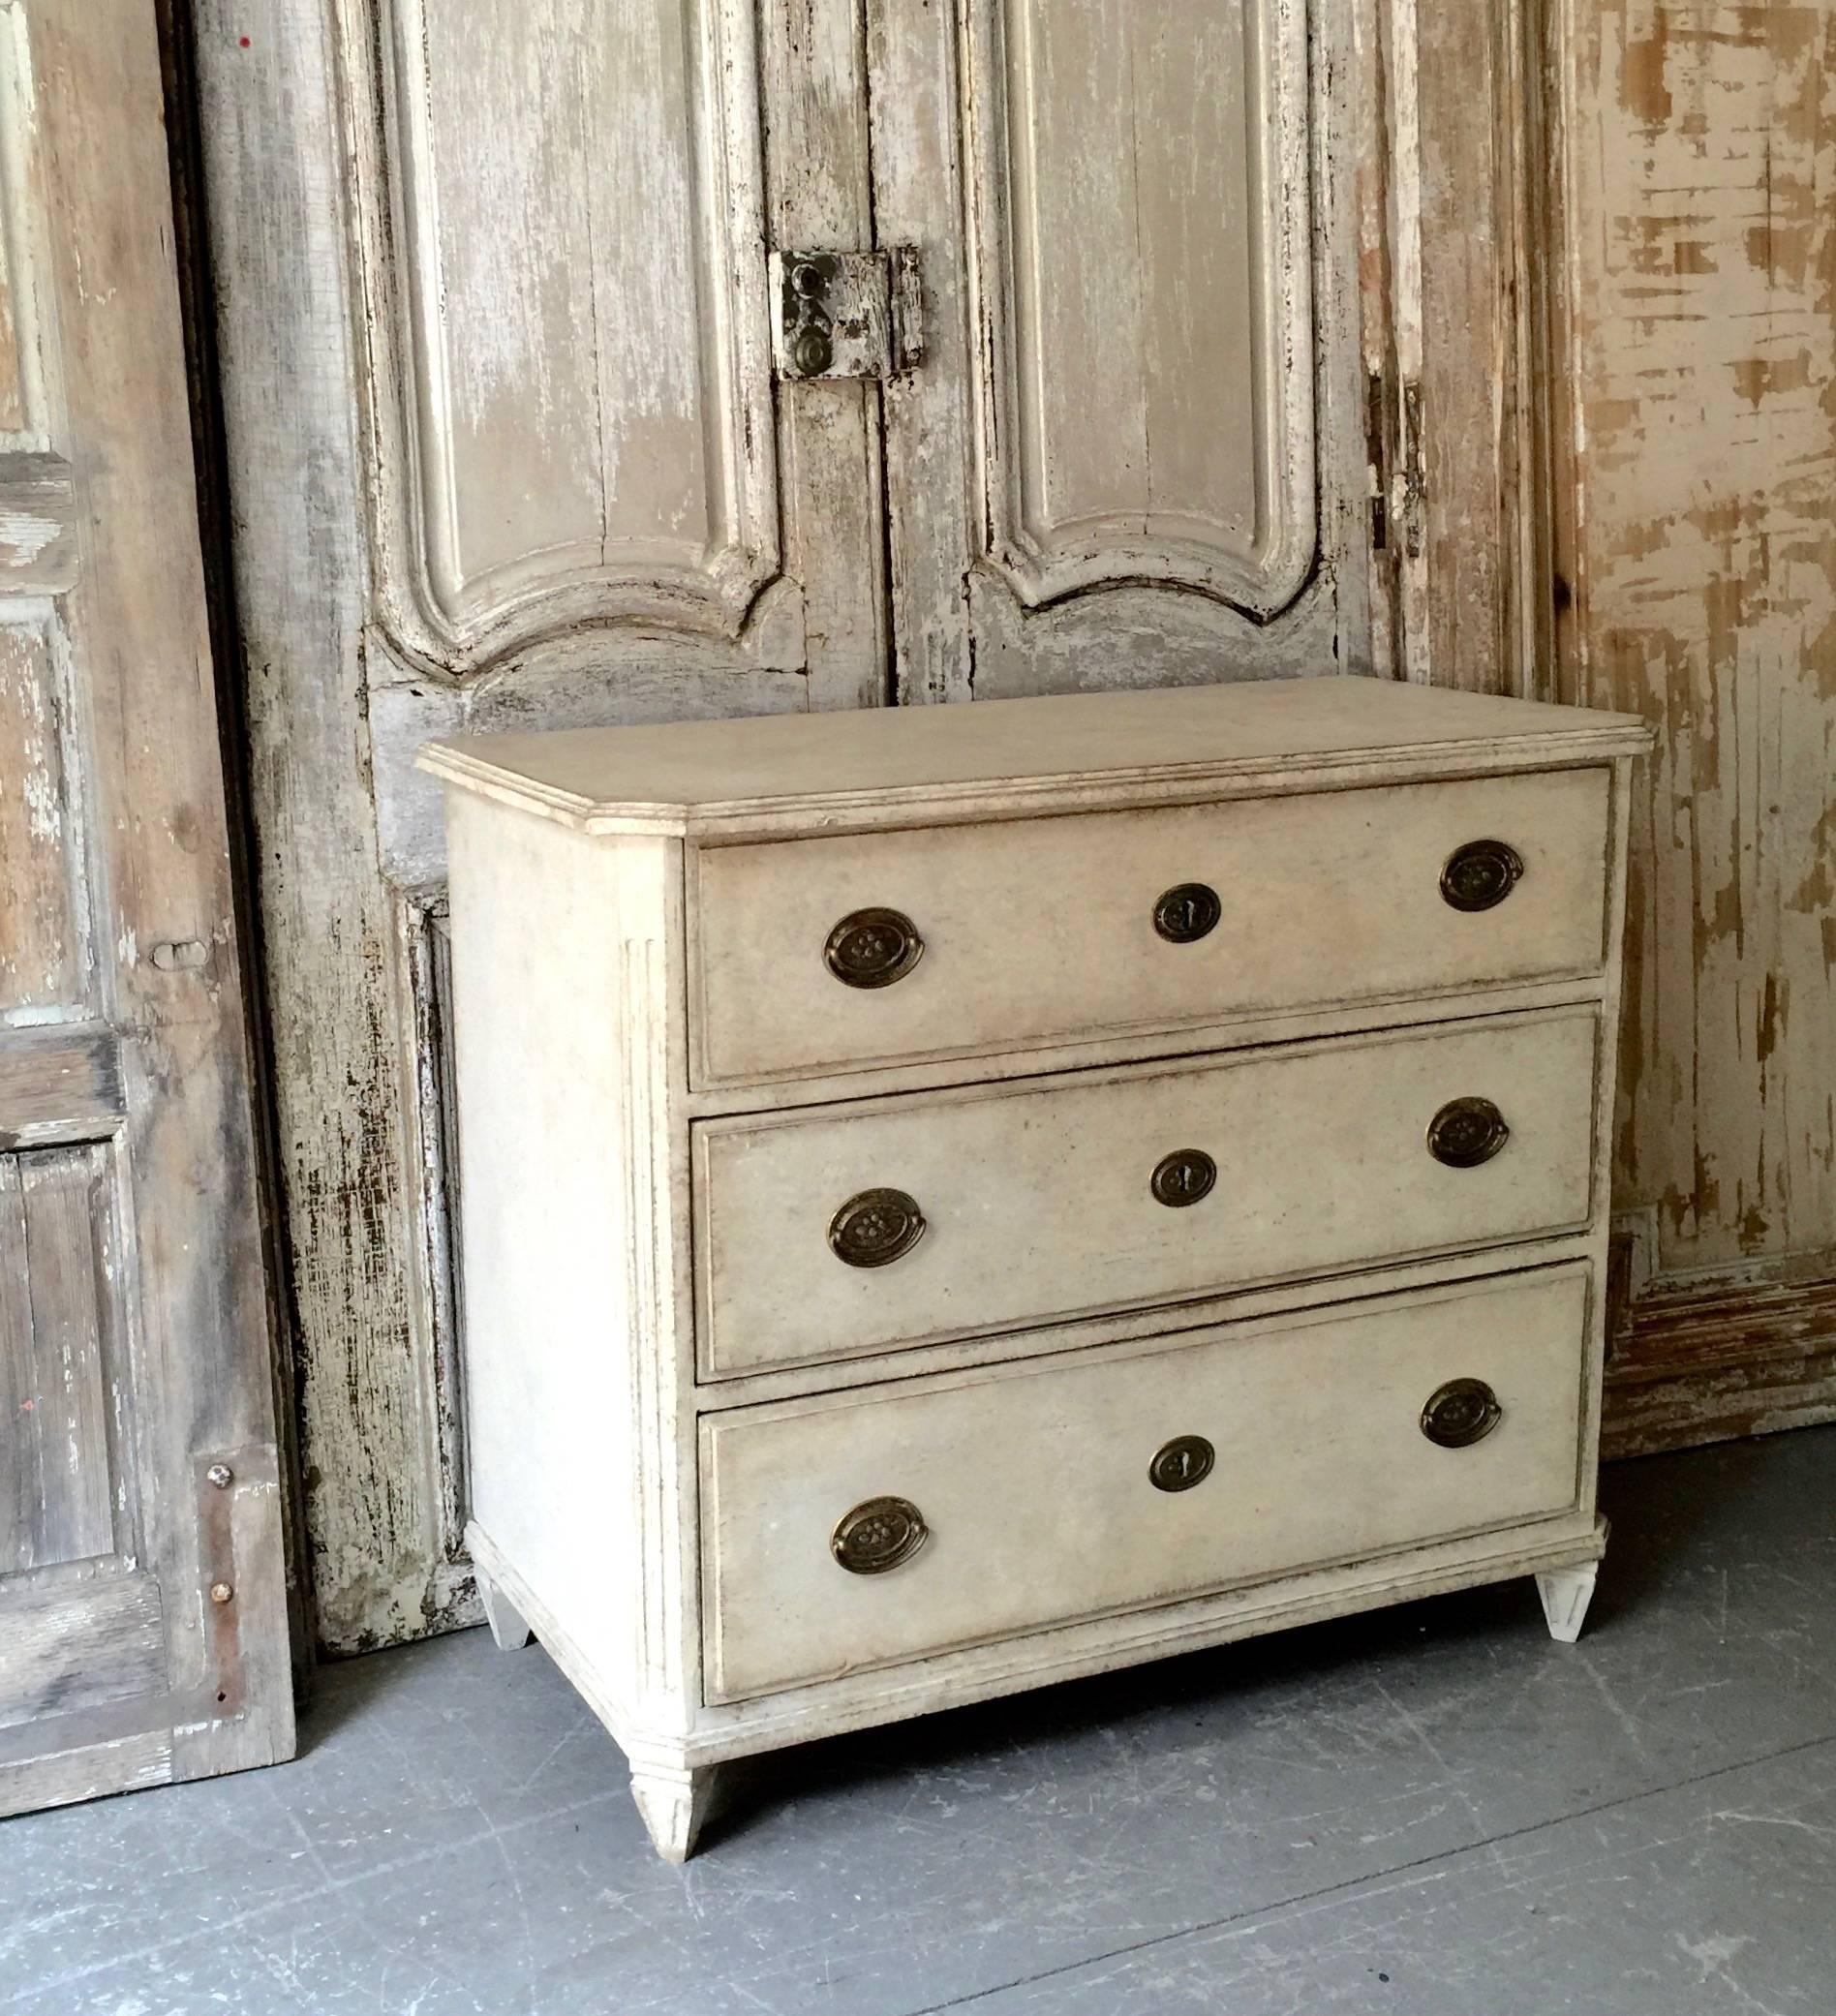 Swedish period Gustavian chest of drawers with three drawers, canted and reeded corners, handsome bronze hardwares and tapering square legs under the shaped top,
Sweden, circa 1820.
More than ever, we selected the best, the rarest, the unusual,